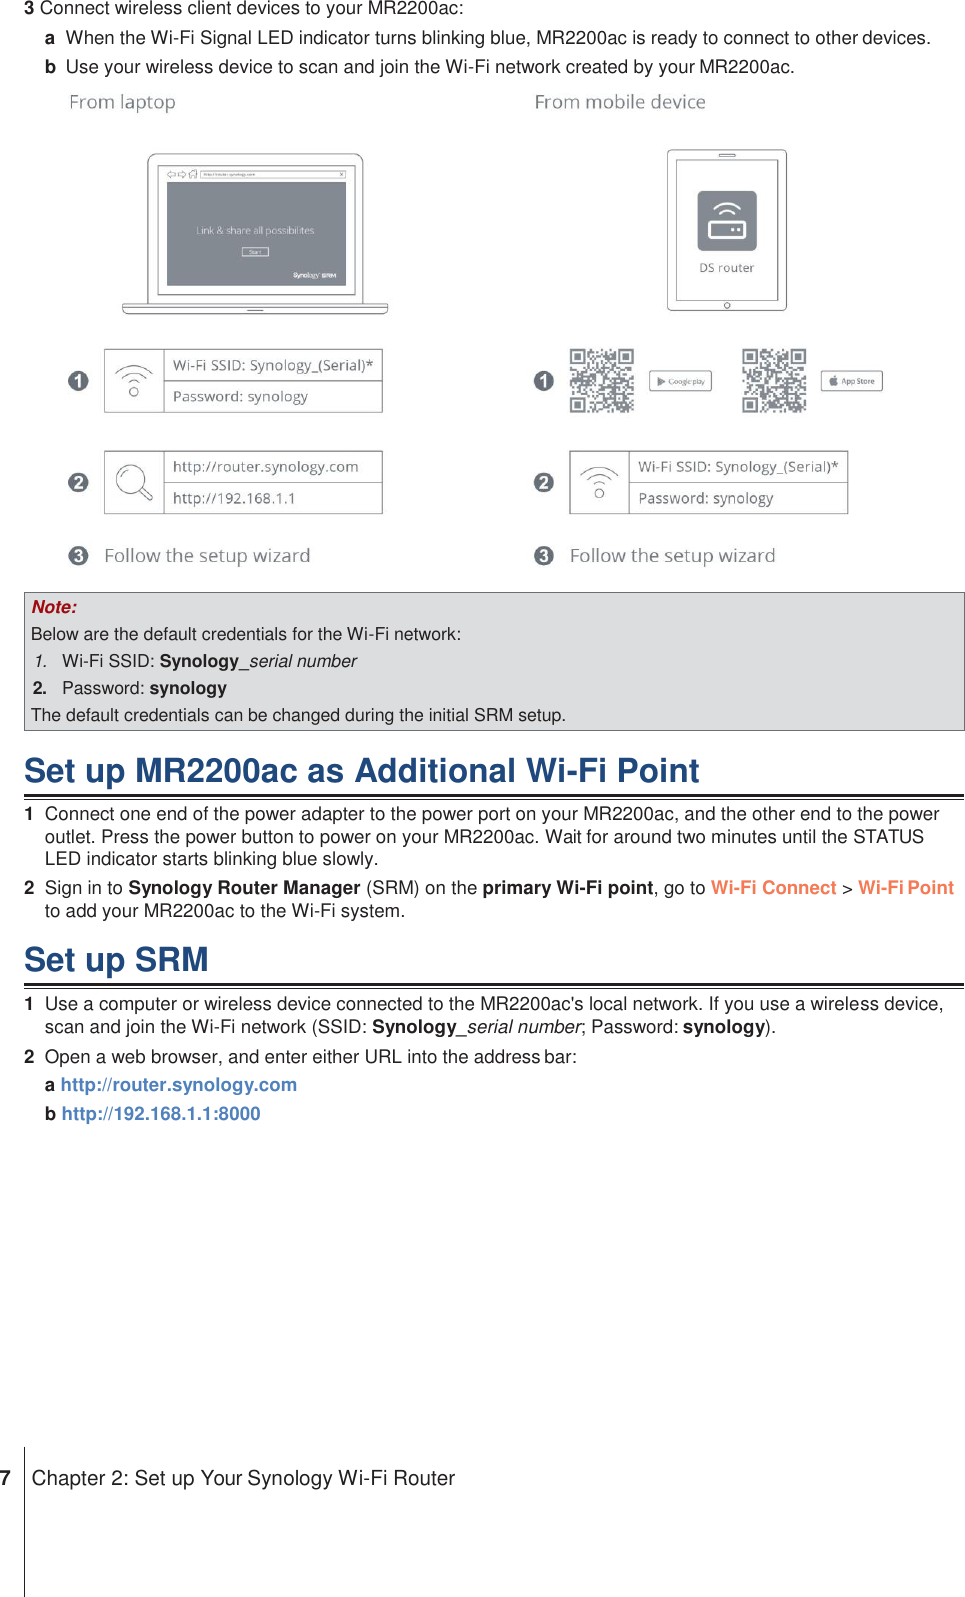 Note: Below are the default credentials for the Wi-Fi network: 1. Wi-Fi SSID: Synology_serial number 2. Password: synology The default credentials can be changed during the initial SRM setup. 3 Connect wireless client devices to your MR2200ac: a  When the Wi-Fi Signal LED indicator turns blinking blue, MR2200ac is ready to connect to other devices. b  Use your wireless device to scan and join the Wi-Fi network created by your MR2200ac.    Set up MR2200ac as Additional Wi-Fi Point 1  Connect one end of the power adapter to the power port on your MR2200ac, and the other end to the power outlet. Press the power button to power on your MR2200ac. Wait for around two minutes until the STATUS LED indicator starts blinking blue slowly. 2  Sign in to Synology Router Manager (SRM) on the primary Wi-Fi point, go to Wi-Fi Connect &gt; Wi-Fi Point to add your MR2200ac to the Wi-Fi system.  Set up SRM 1  Use a computer or wireless device connected to the MR2200ac&apos;s local network. If you use a wireless device, scan and join the Wi-Fi network (SSID: Synology_serial number; Password: synology). 2  Open a web browser, and enter either URL into the address bar: a http://router.synology.com b http://192.168.1.1:8000               7  Chapter 2: Set up Your Synology Wi-Fi Router 